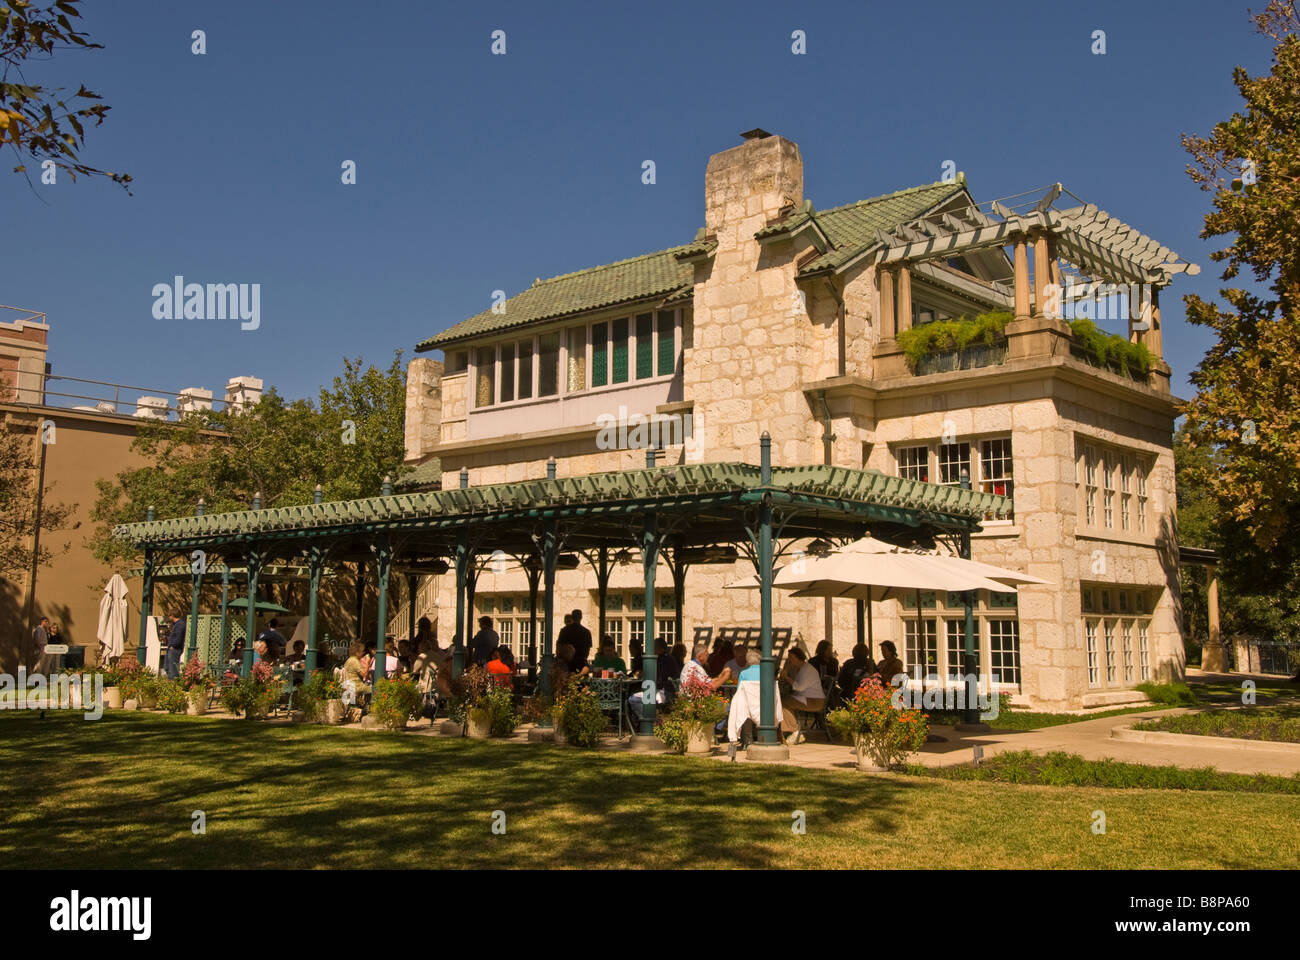 Guenther House san antonio texas tx restored as ac museum and restaurant outdoor cafe with diners, popular tourist attraction Stock Photo